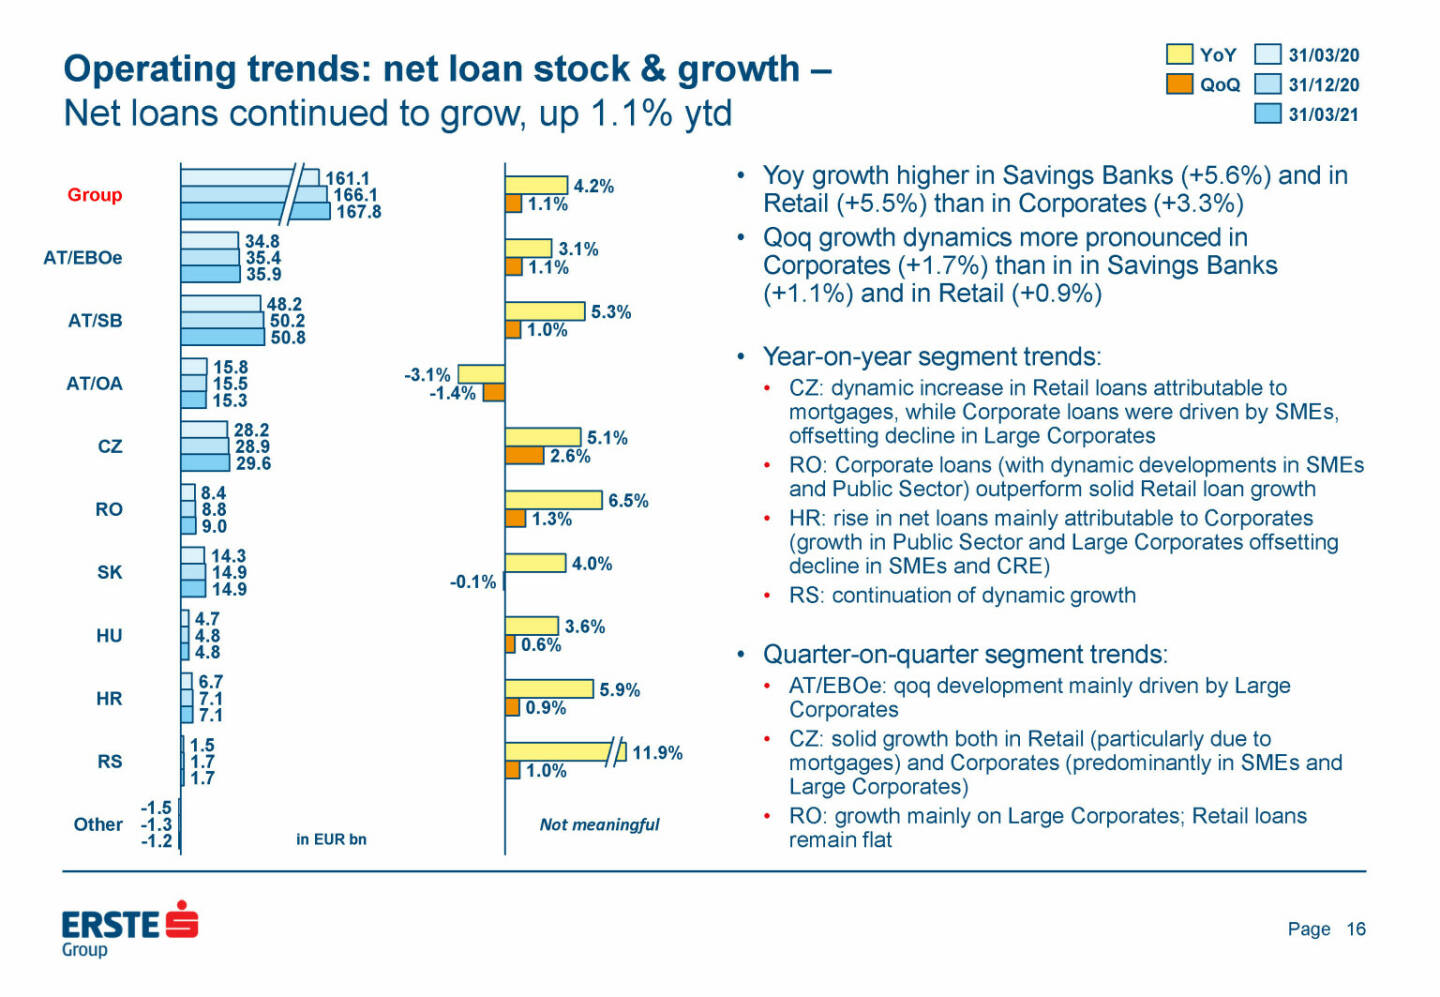 Erste Group - Operating trends: net loan stock & growth